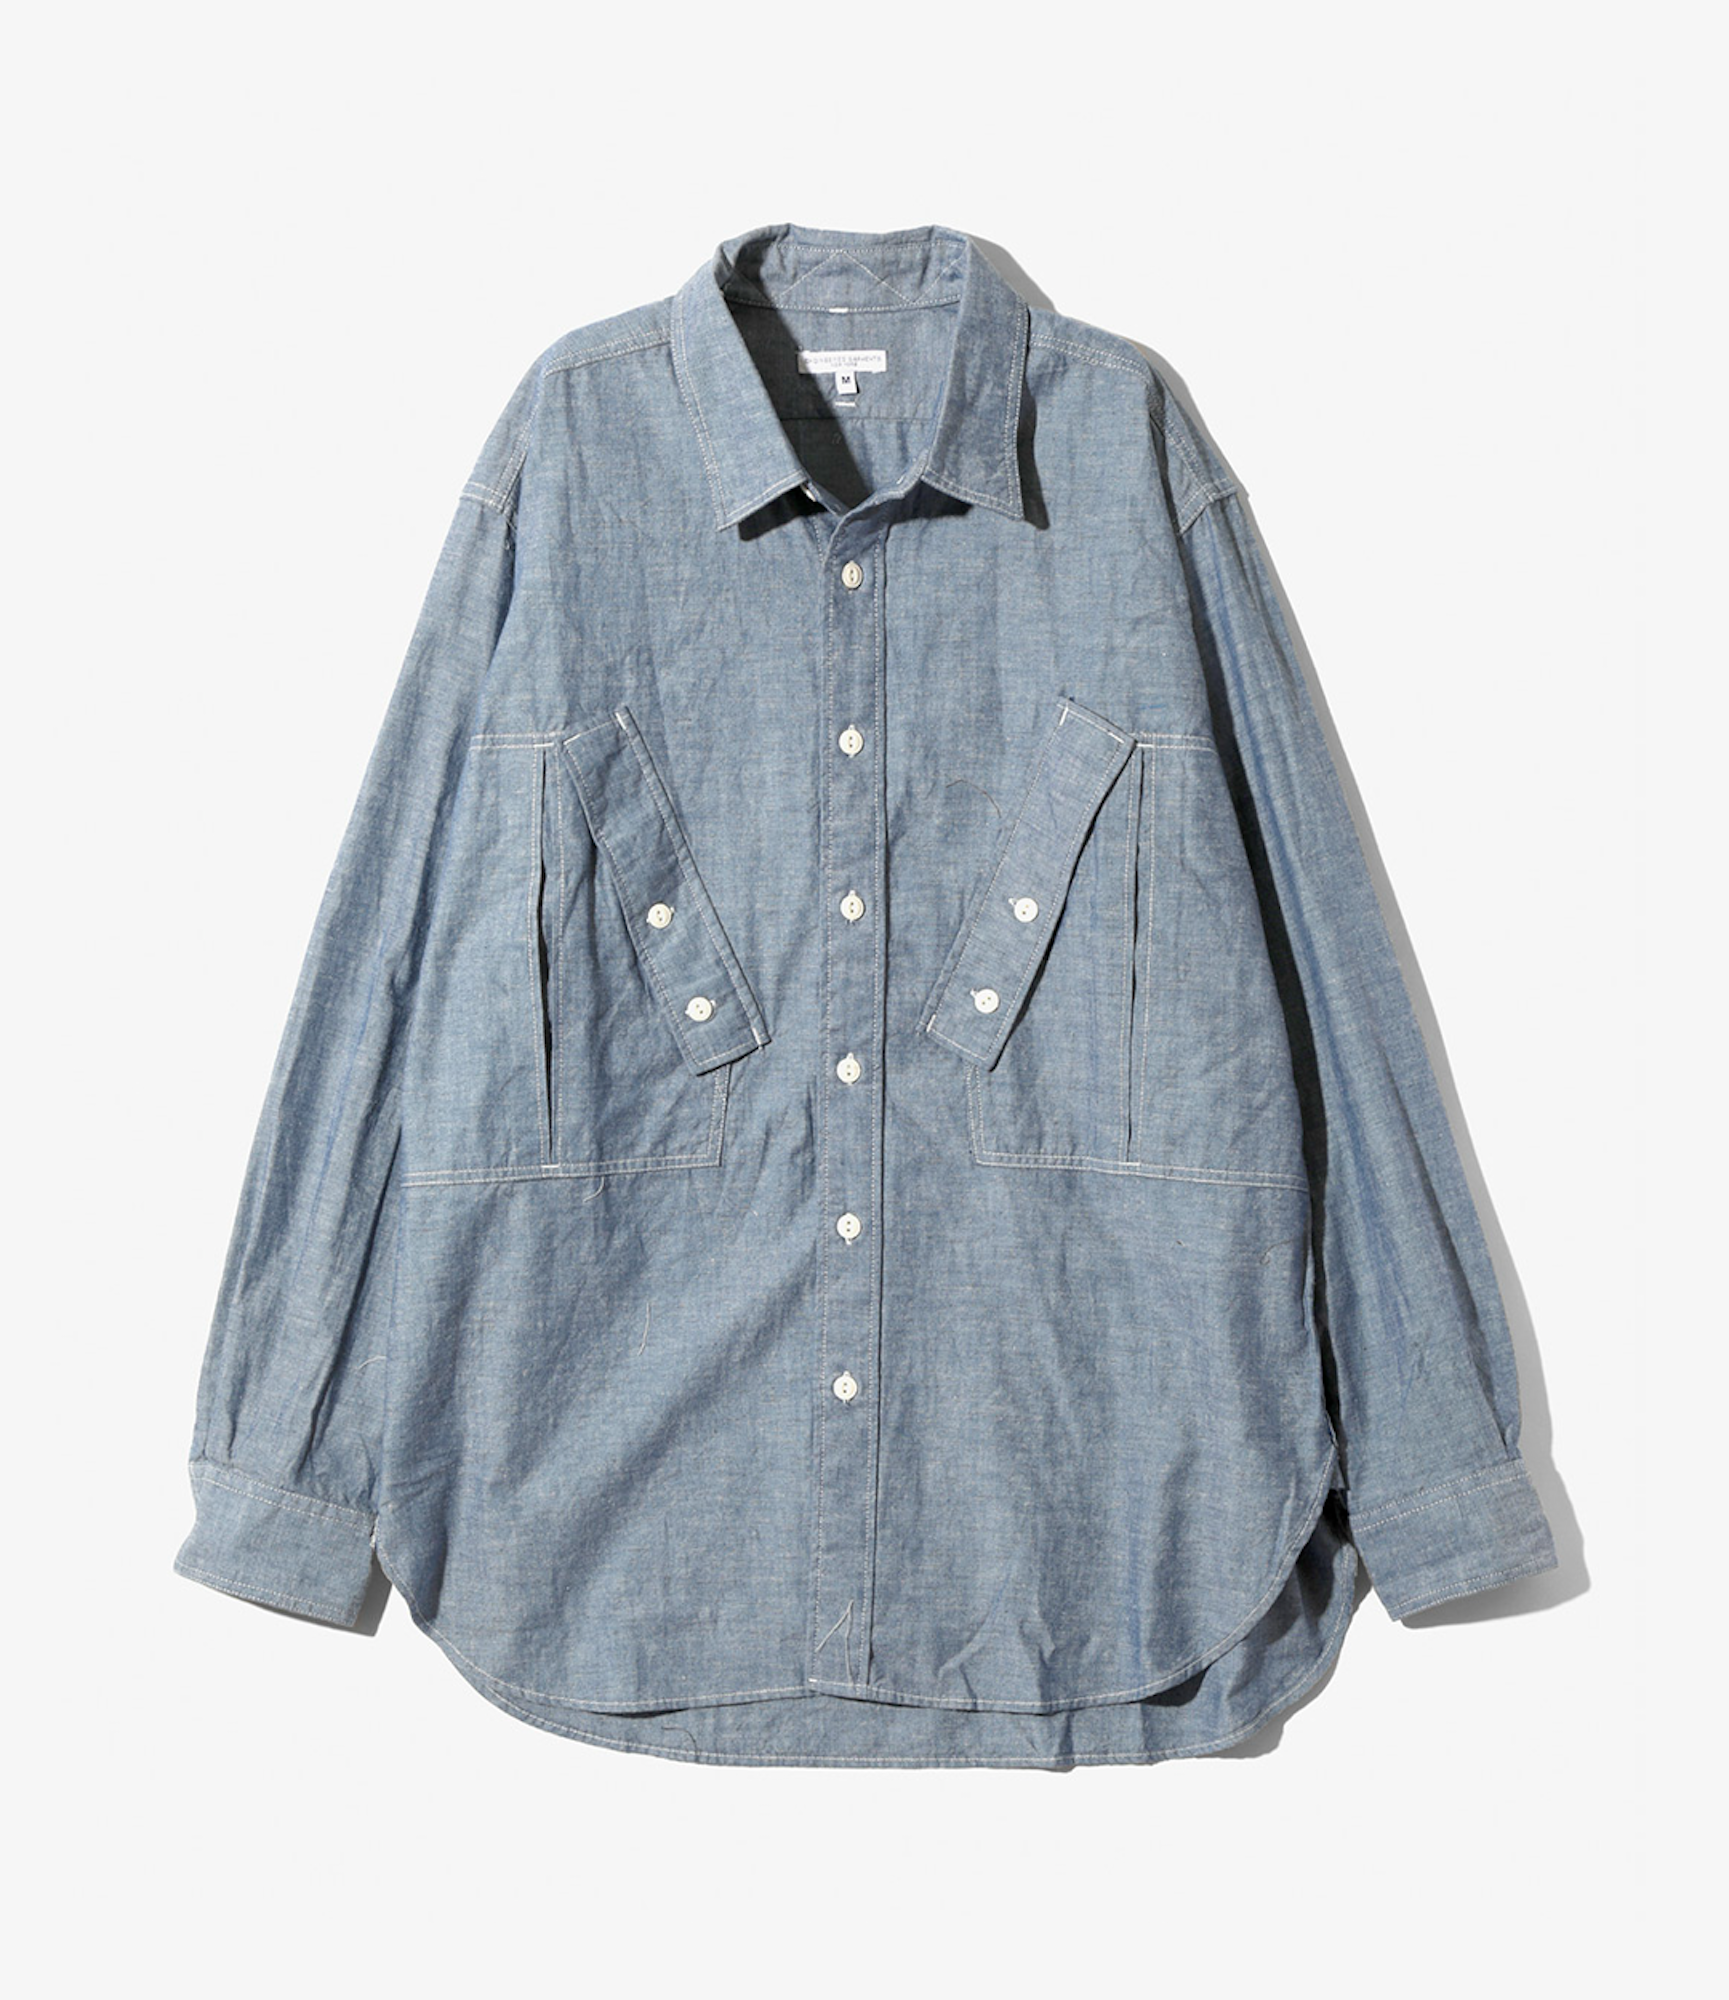 Nepenthes Exclusive Engineered Garments Field Shirt - Blue Cotton Chambray